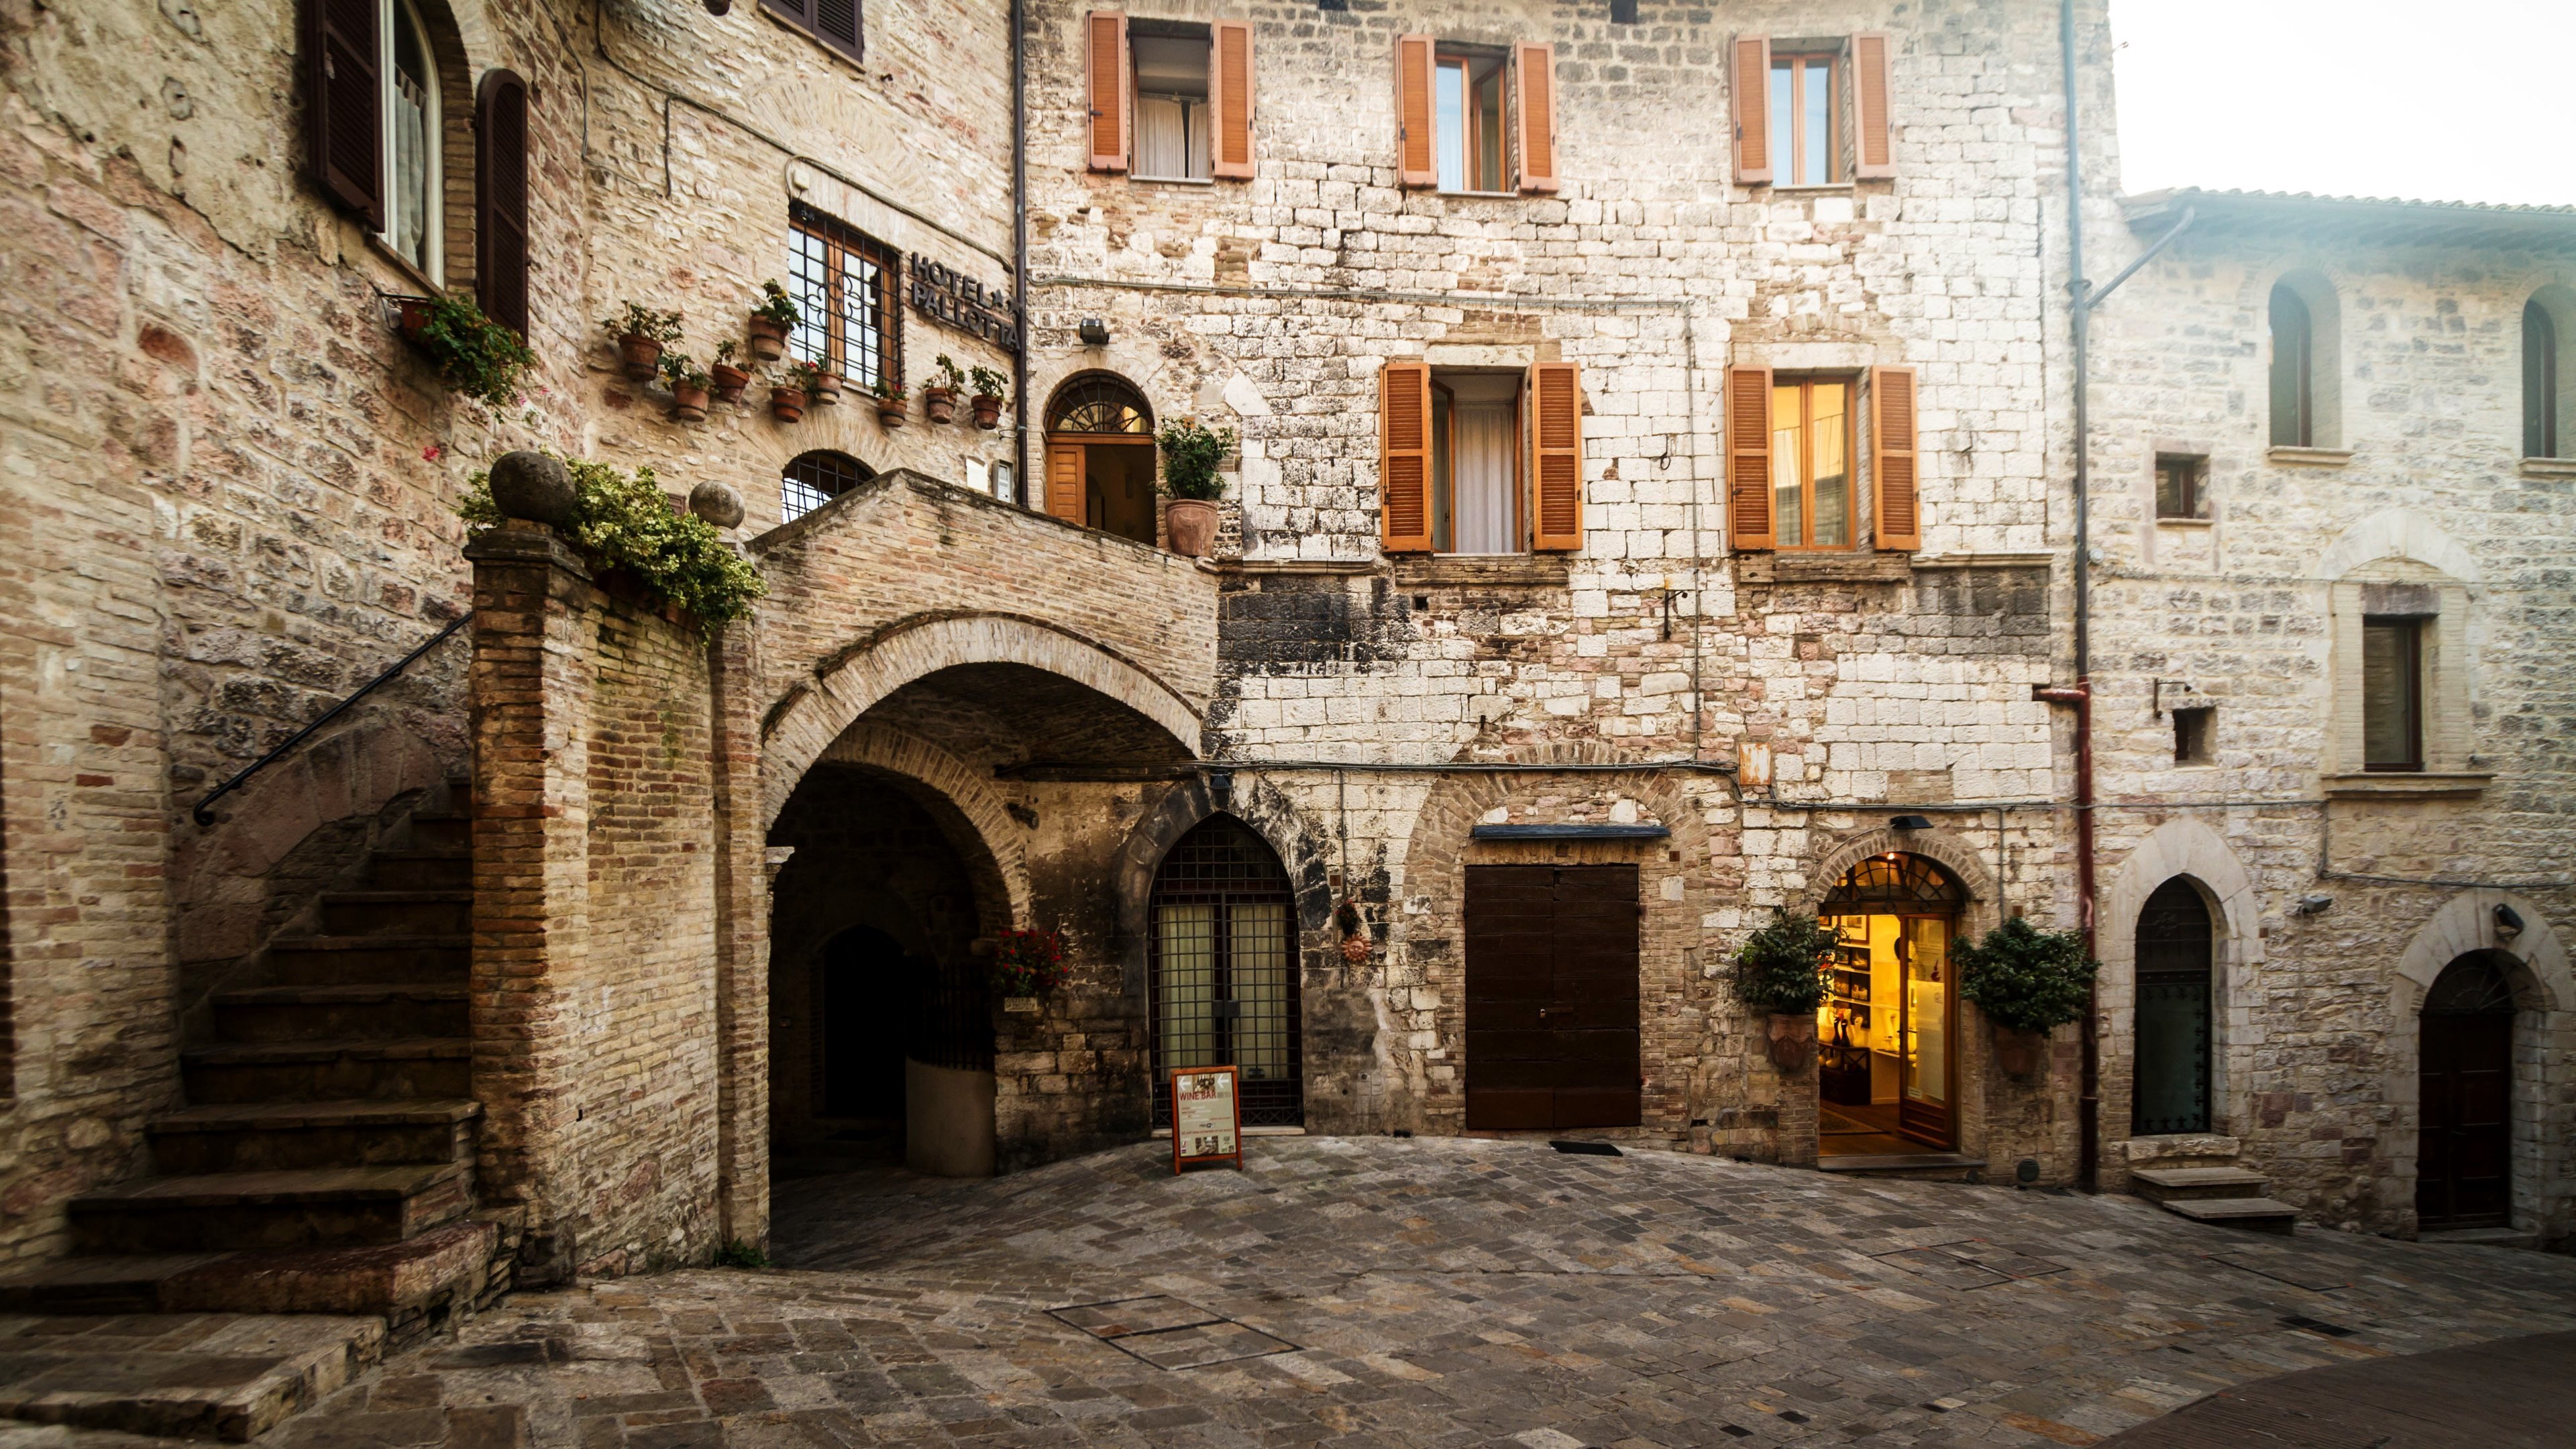 houses, Italy, Street, Assisi, Perugia, Umbria, Cities Wallpaper